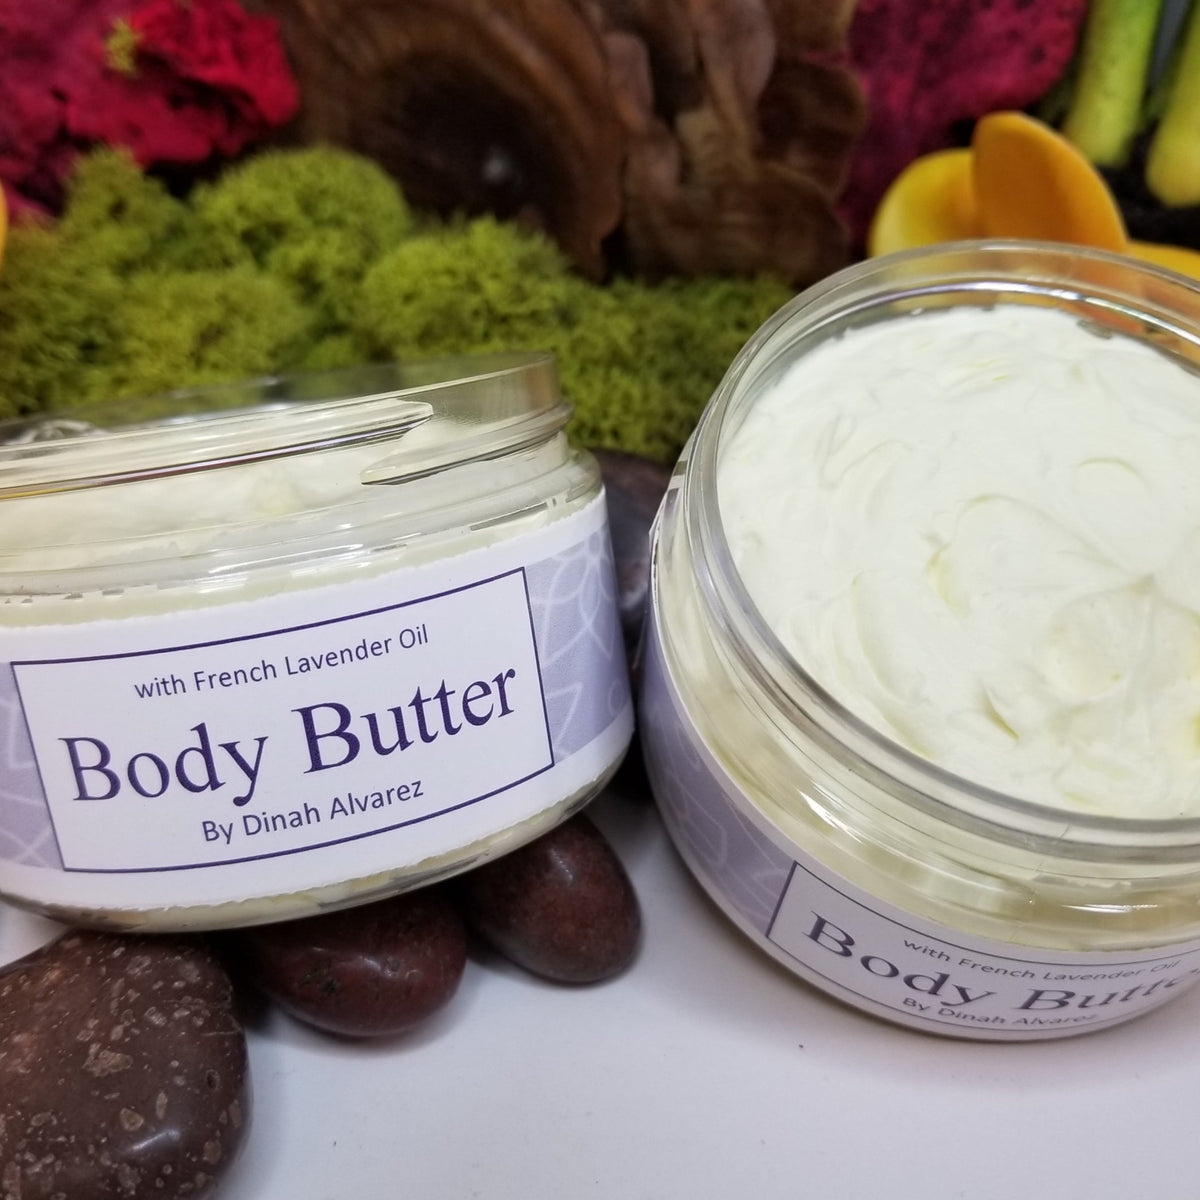 Body butter with French Lavender oil